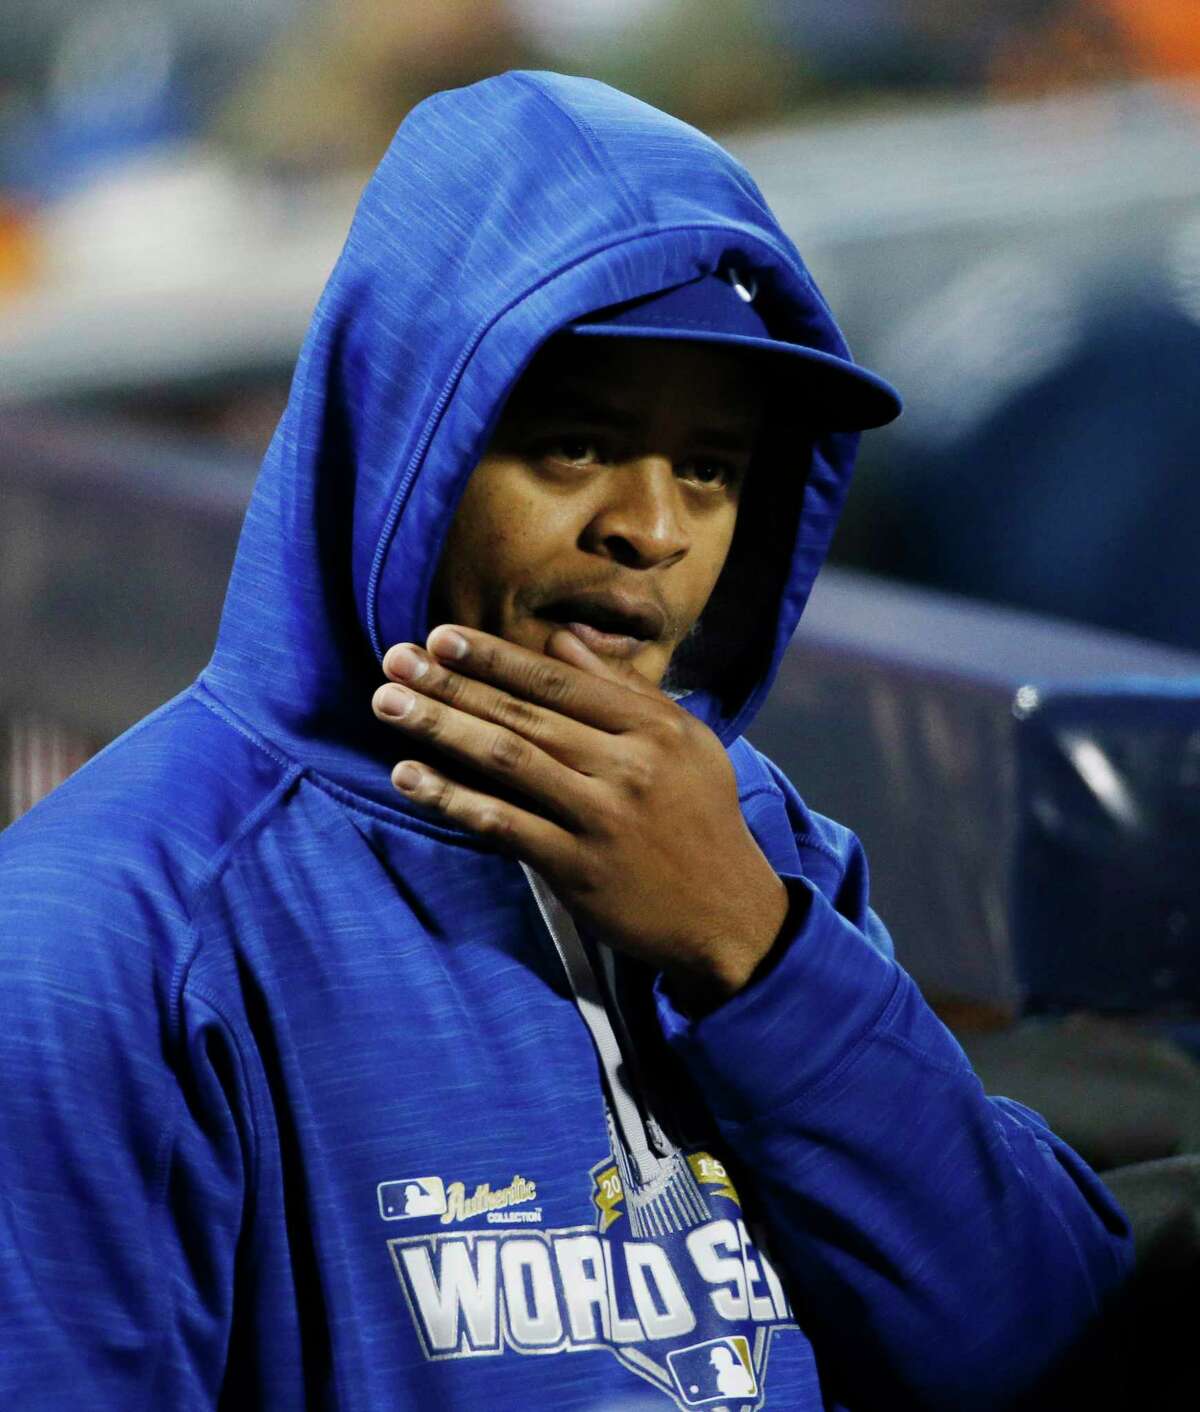 Royals pitcher Edinson Volquez watches his team during the second inning of Game 4 of the World Series on Saturday.